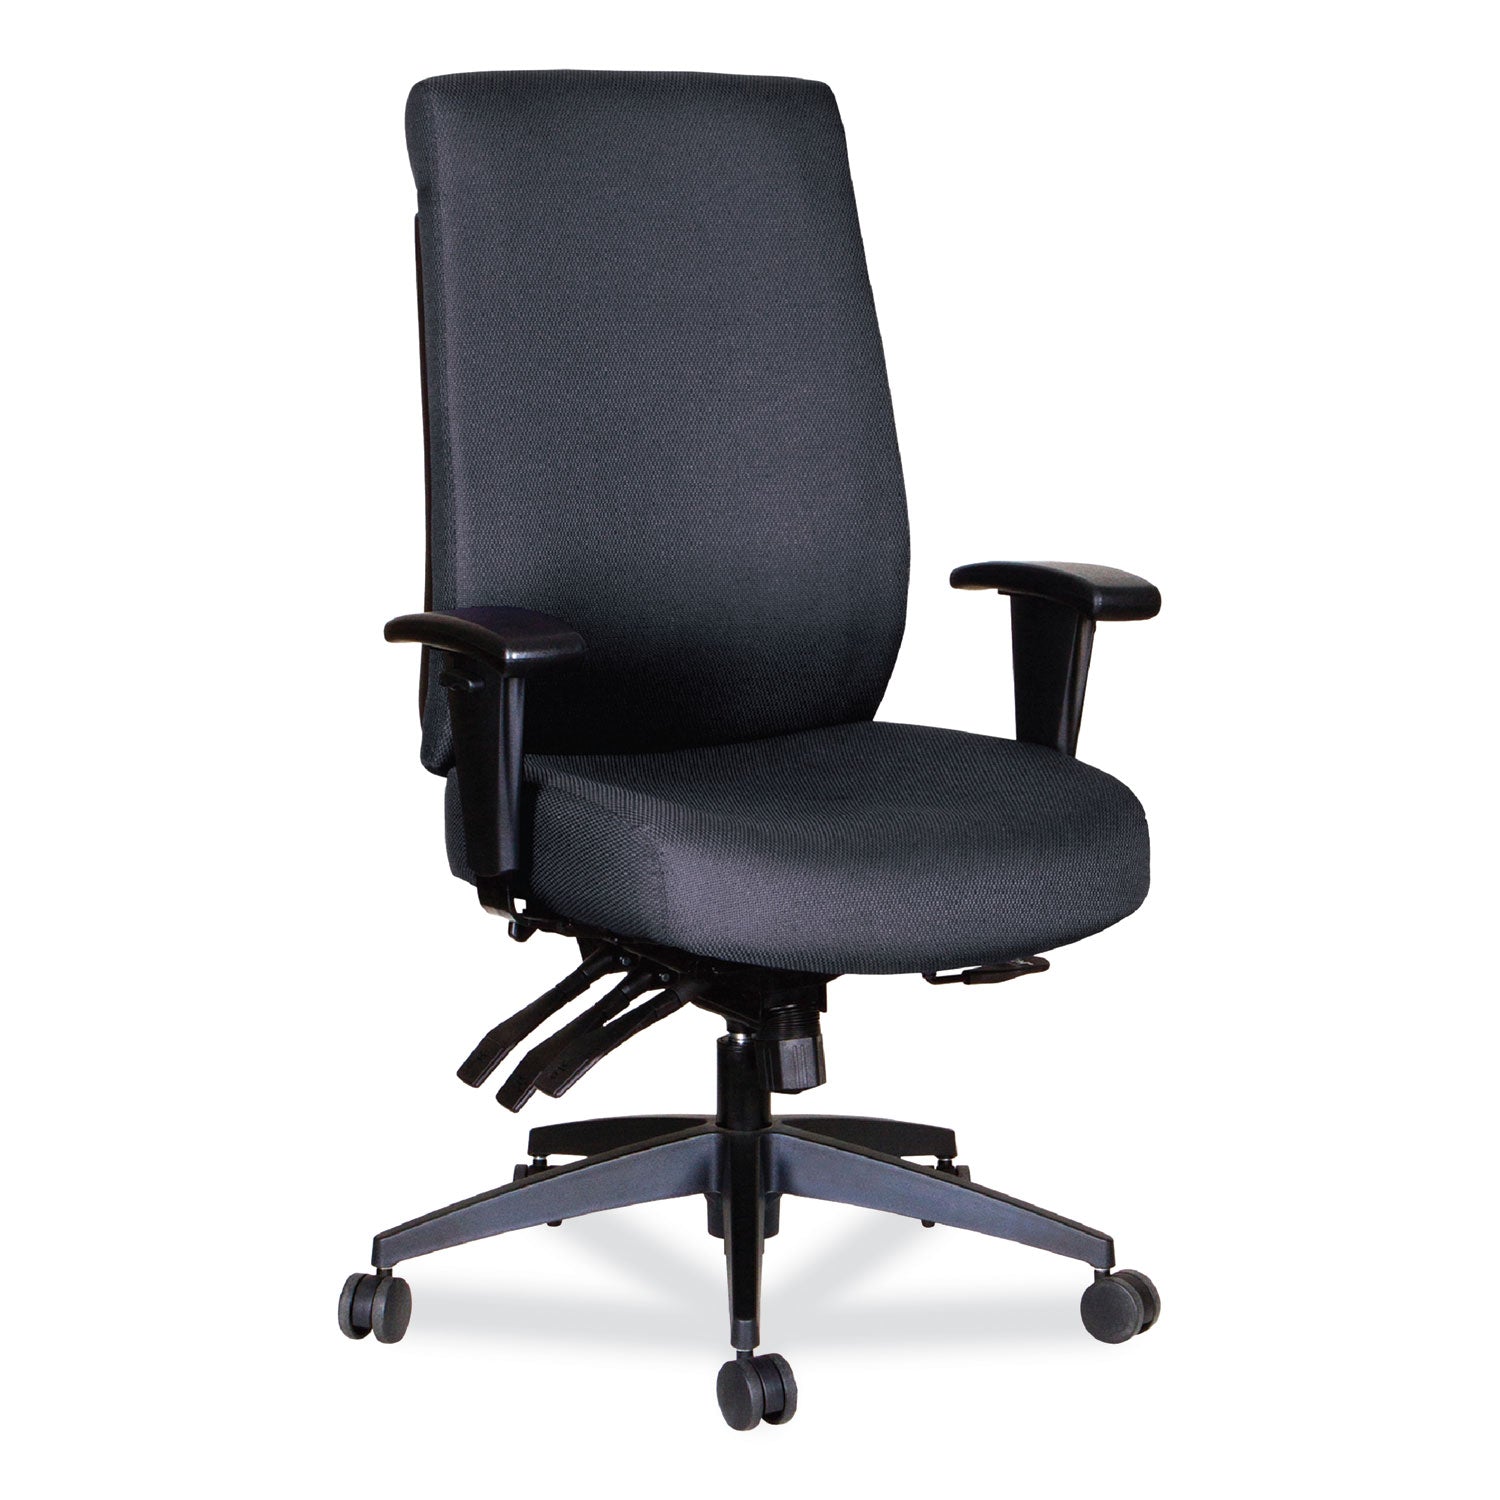 alera-wrigley-series-high-performance-high-back-multifunction-task-chair-supports-275-lb-187-to-2224-seat-height-black_alehpm4101 - 1